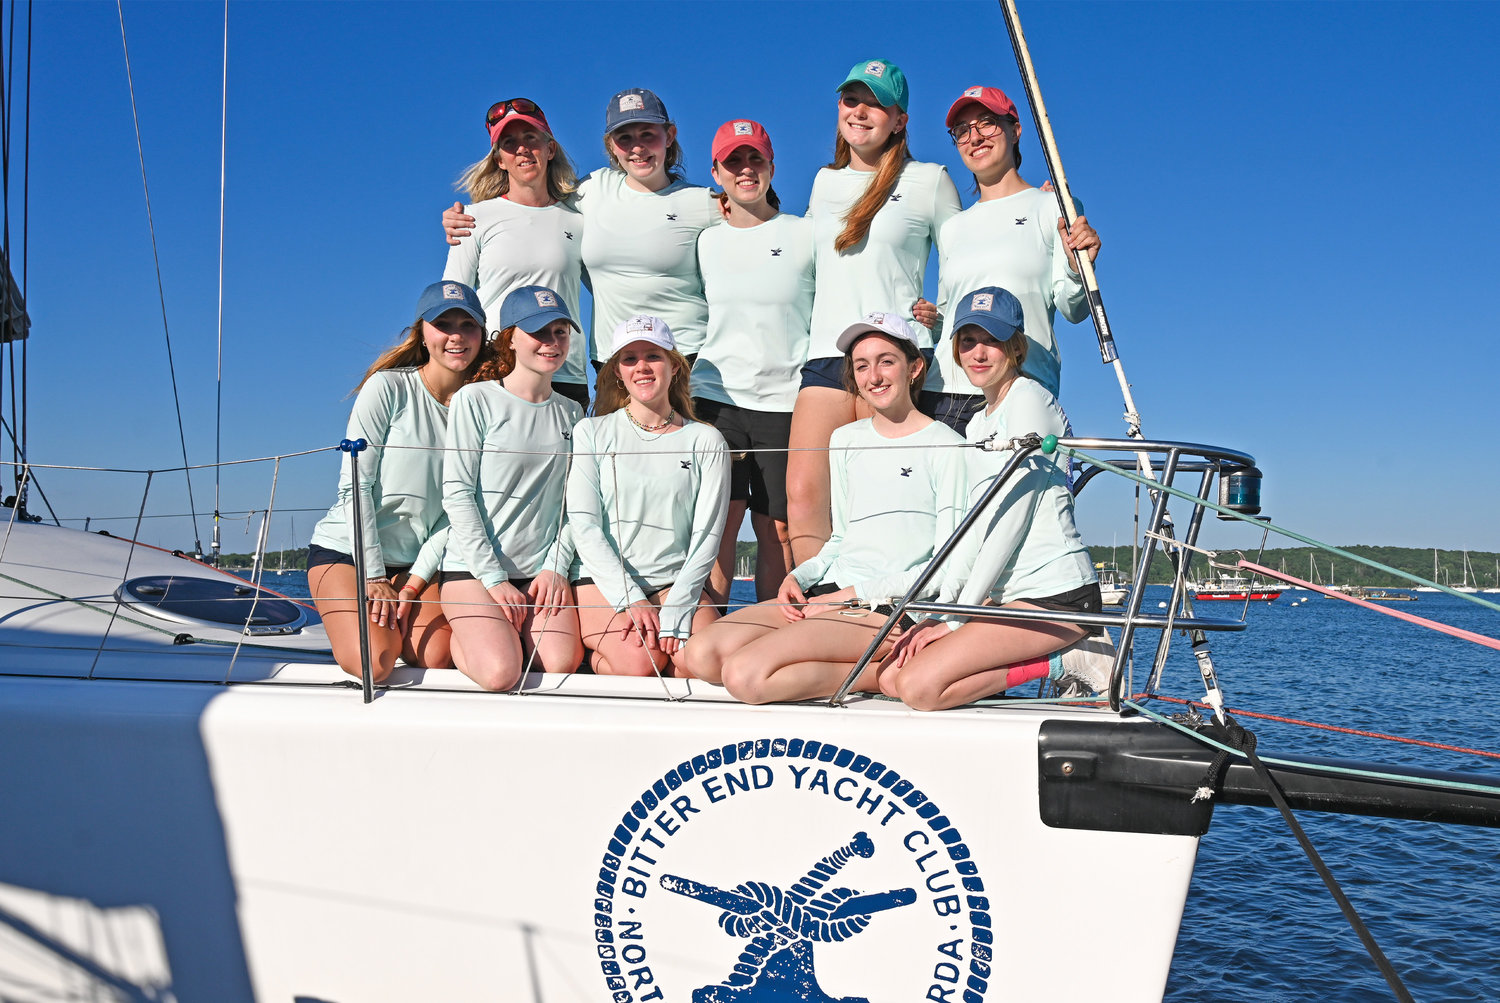 The all-female Team Bitter End made up a group of some of the youngest sailors fo compete